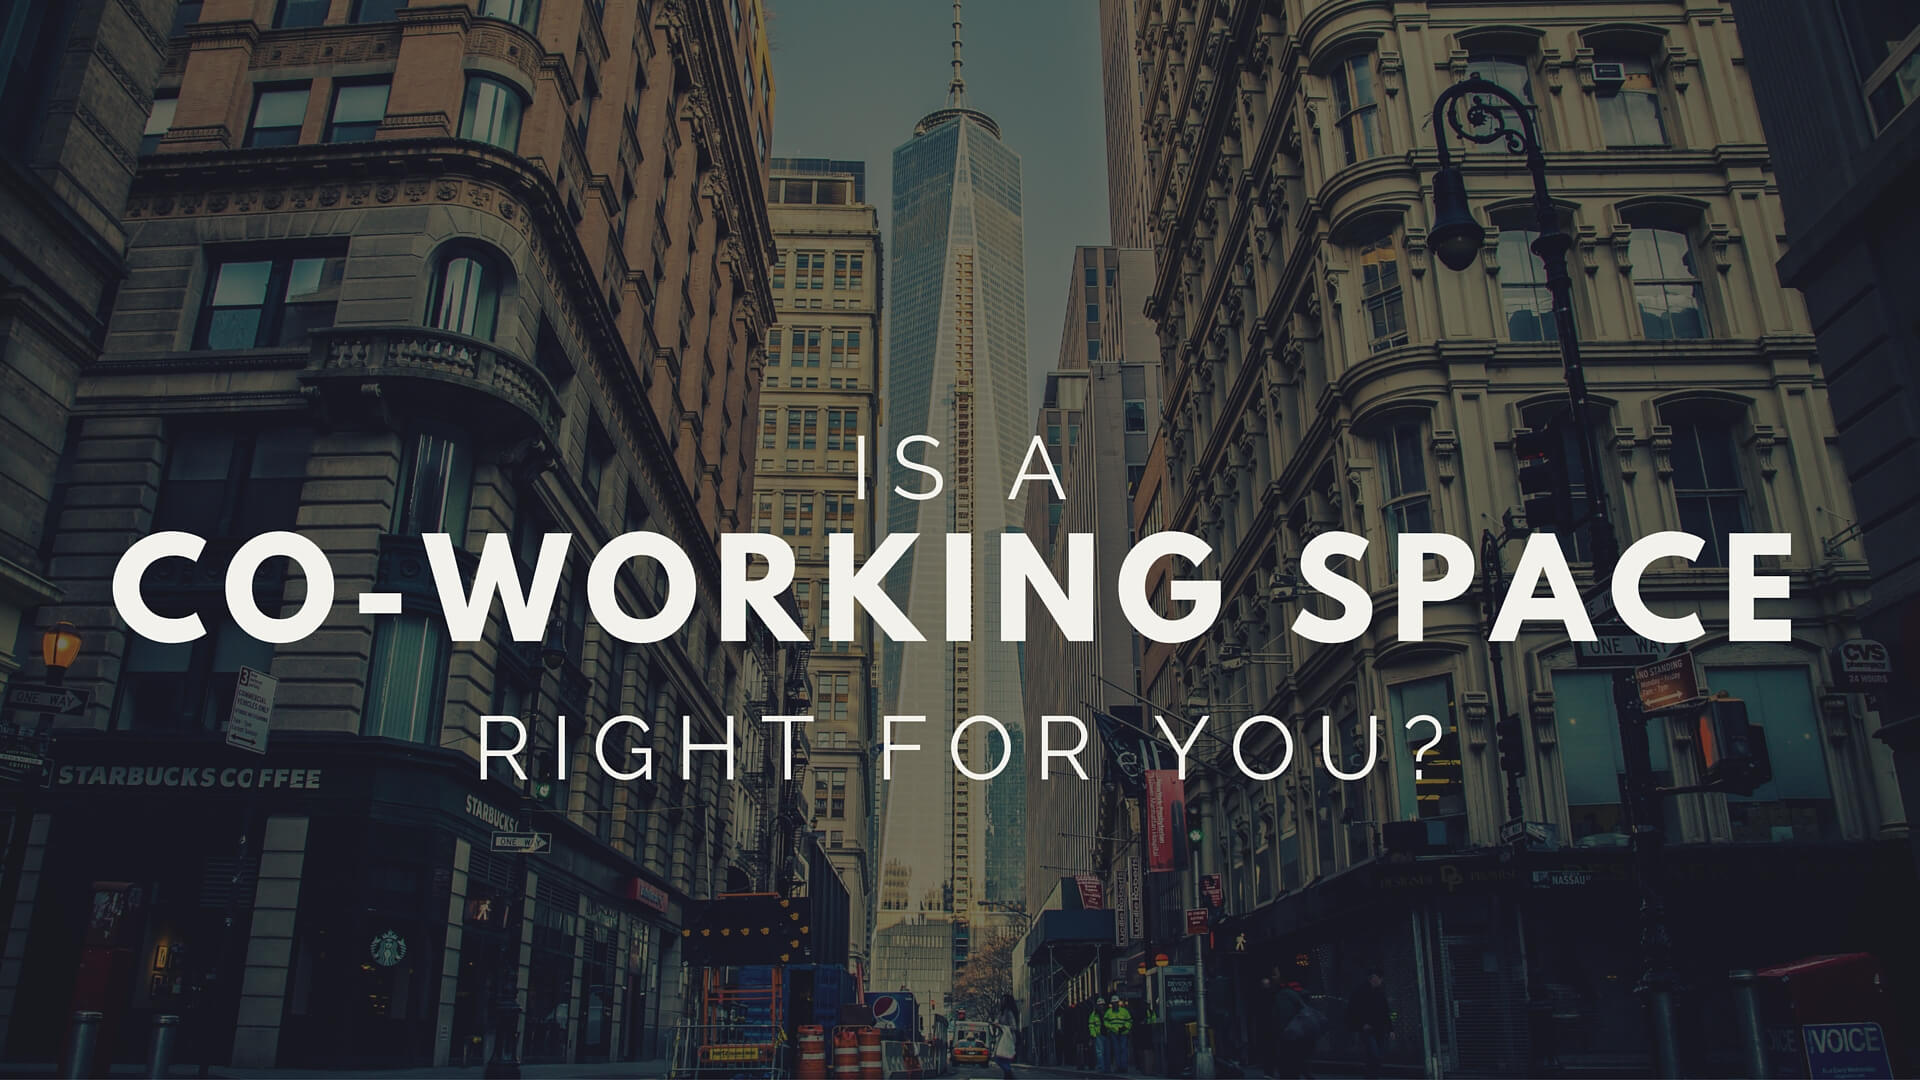 Kewho Min asks, "How to tell if a coworking space is right for you?"